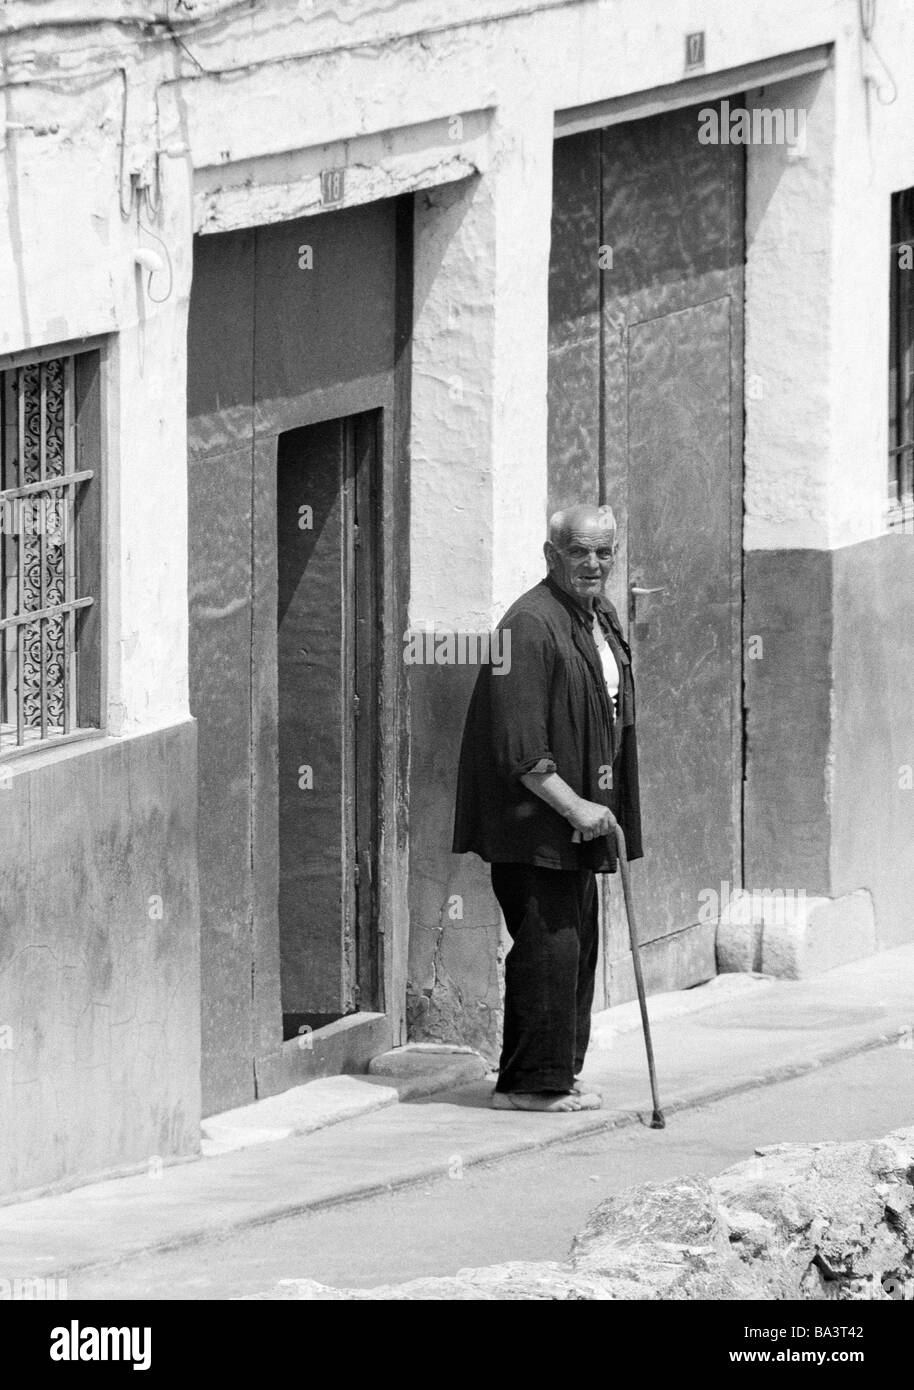 Seventies, black and white photo, people, older people, older man with a walking stick stands in front of a house door, barefooted, aged 70 to 80 years, Spain, Valencia Stock Photo